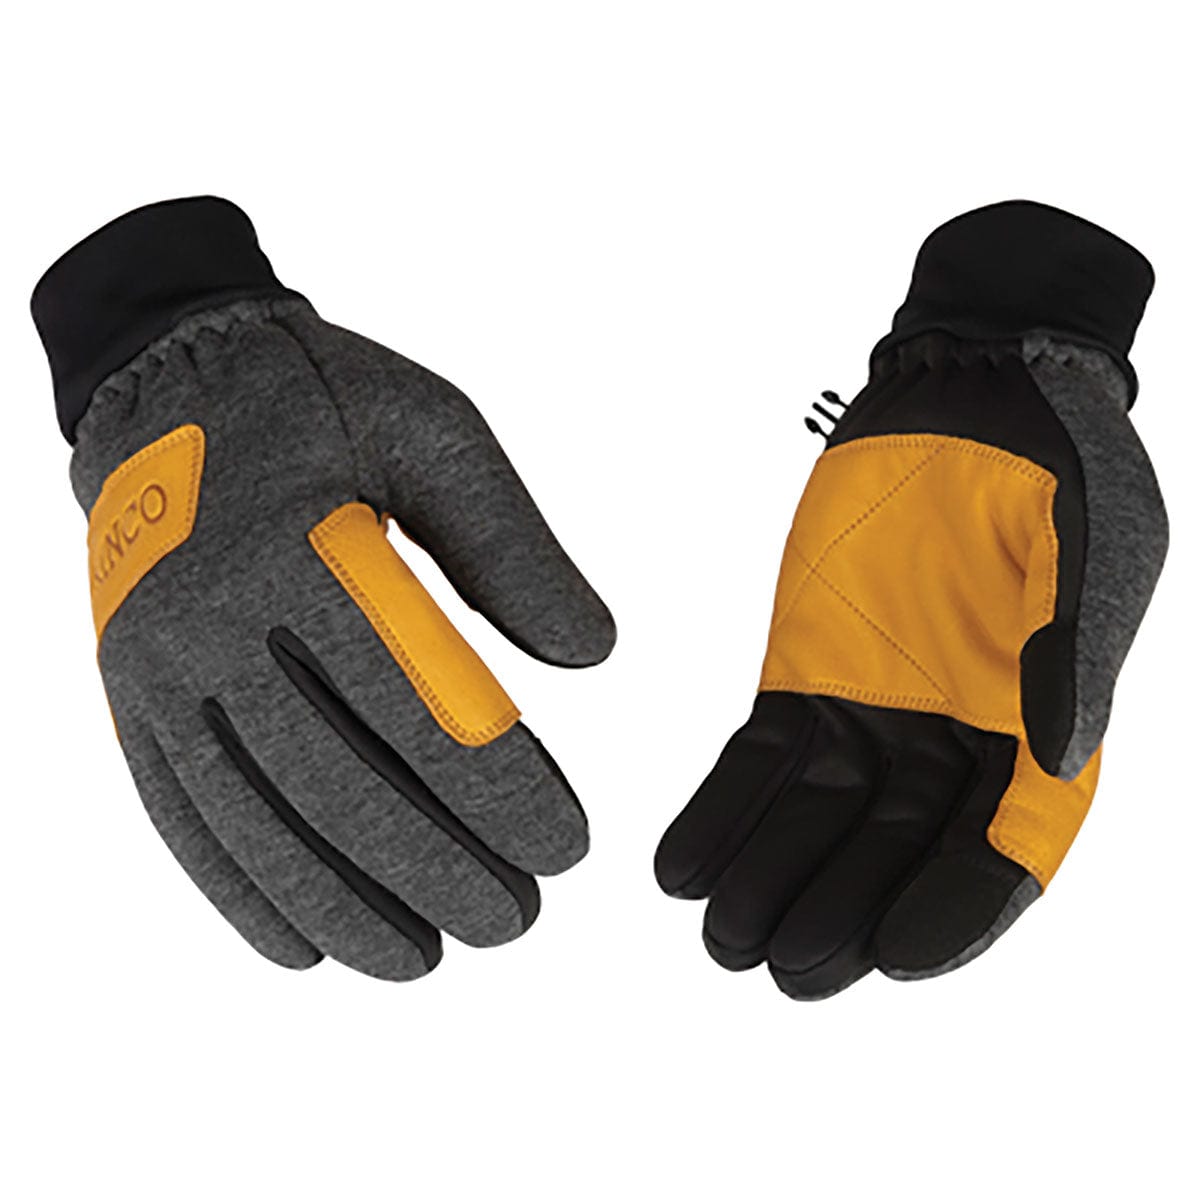 Kinco Lined Lightweight Fleece Hybrid Gloves with Double-Palm